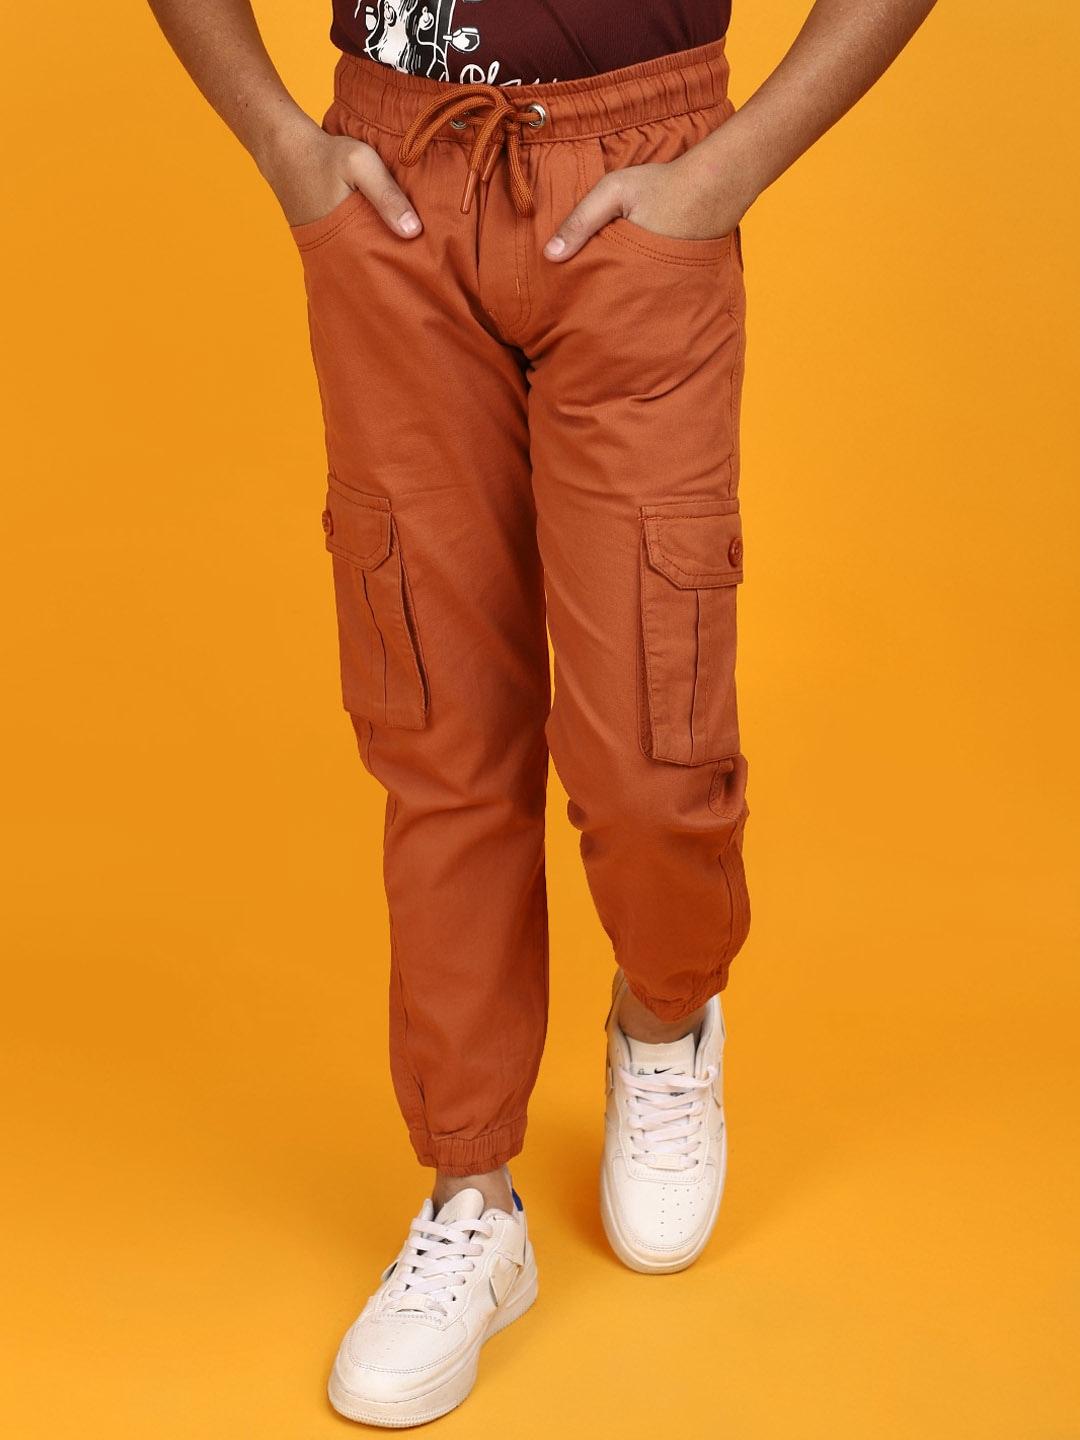 v-mart-boys-mid-rise-regular-fit-cotton-cargos-trousers